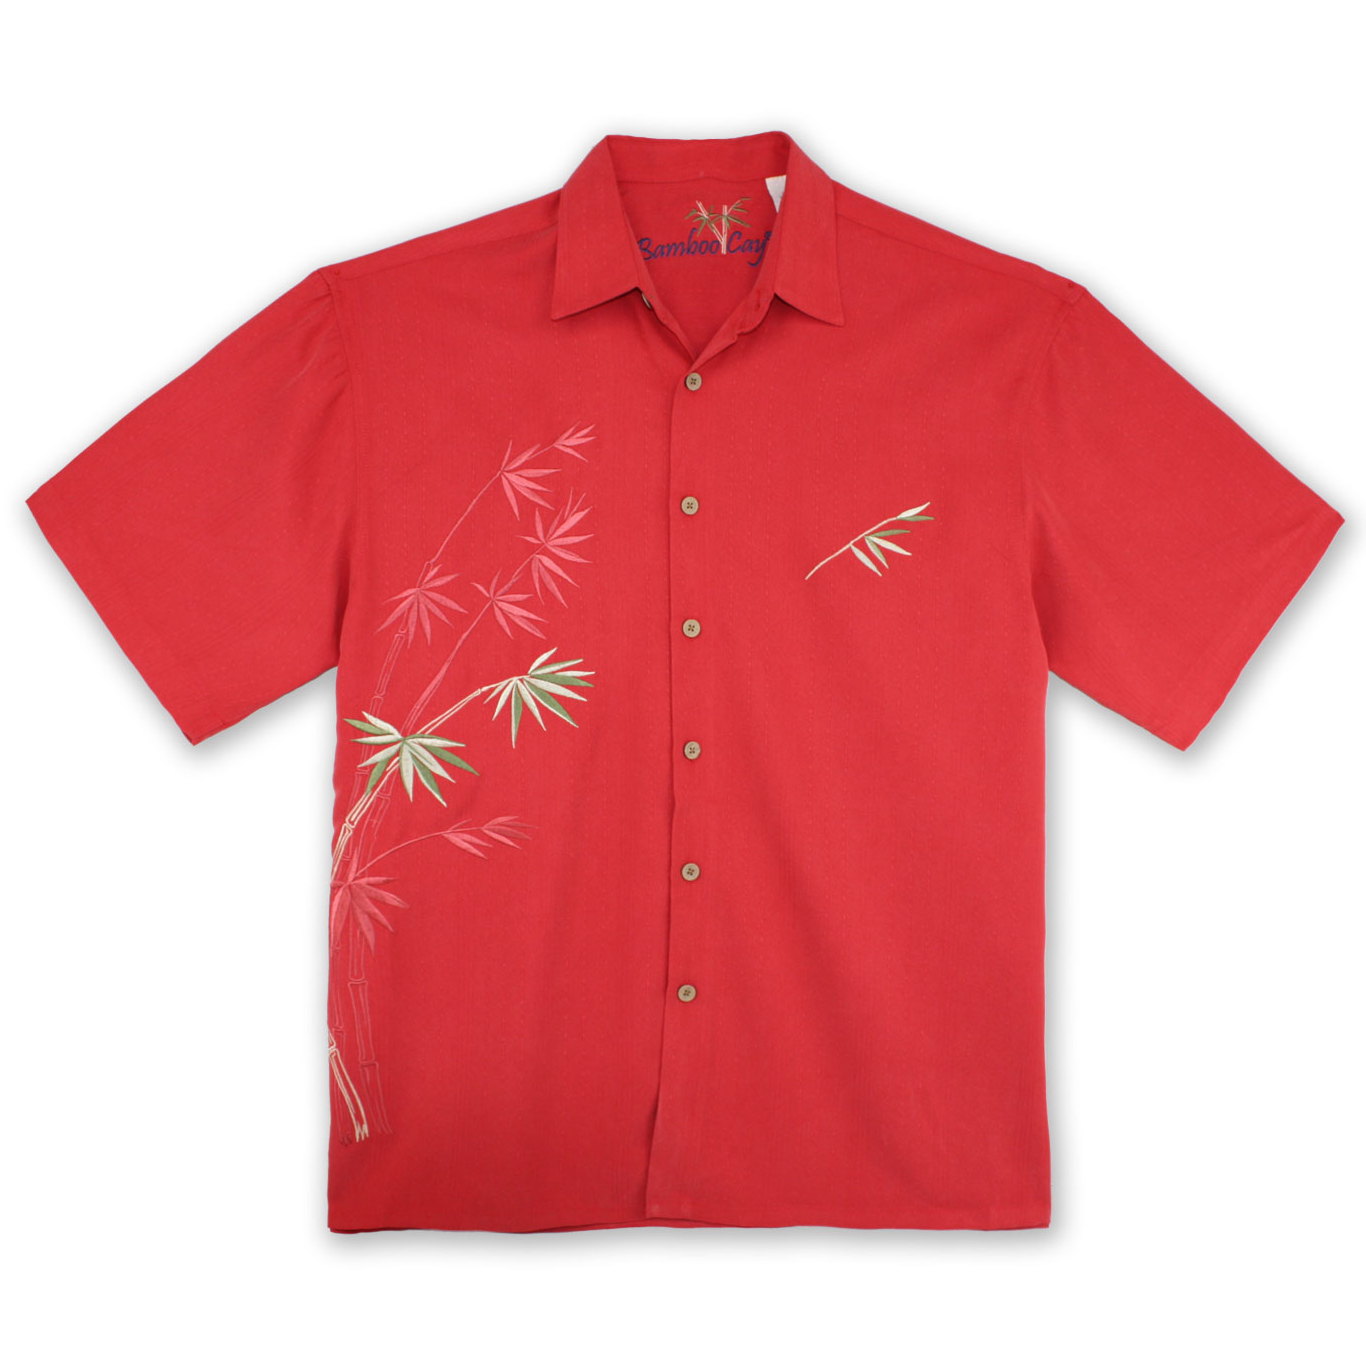 bamboo-cay-mens-shirt-flying-bamboo-red-front-view